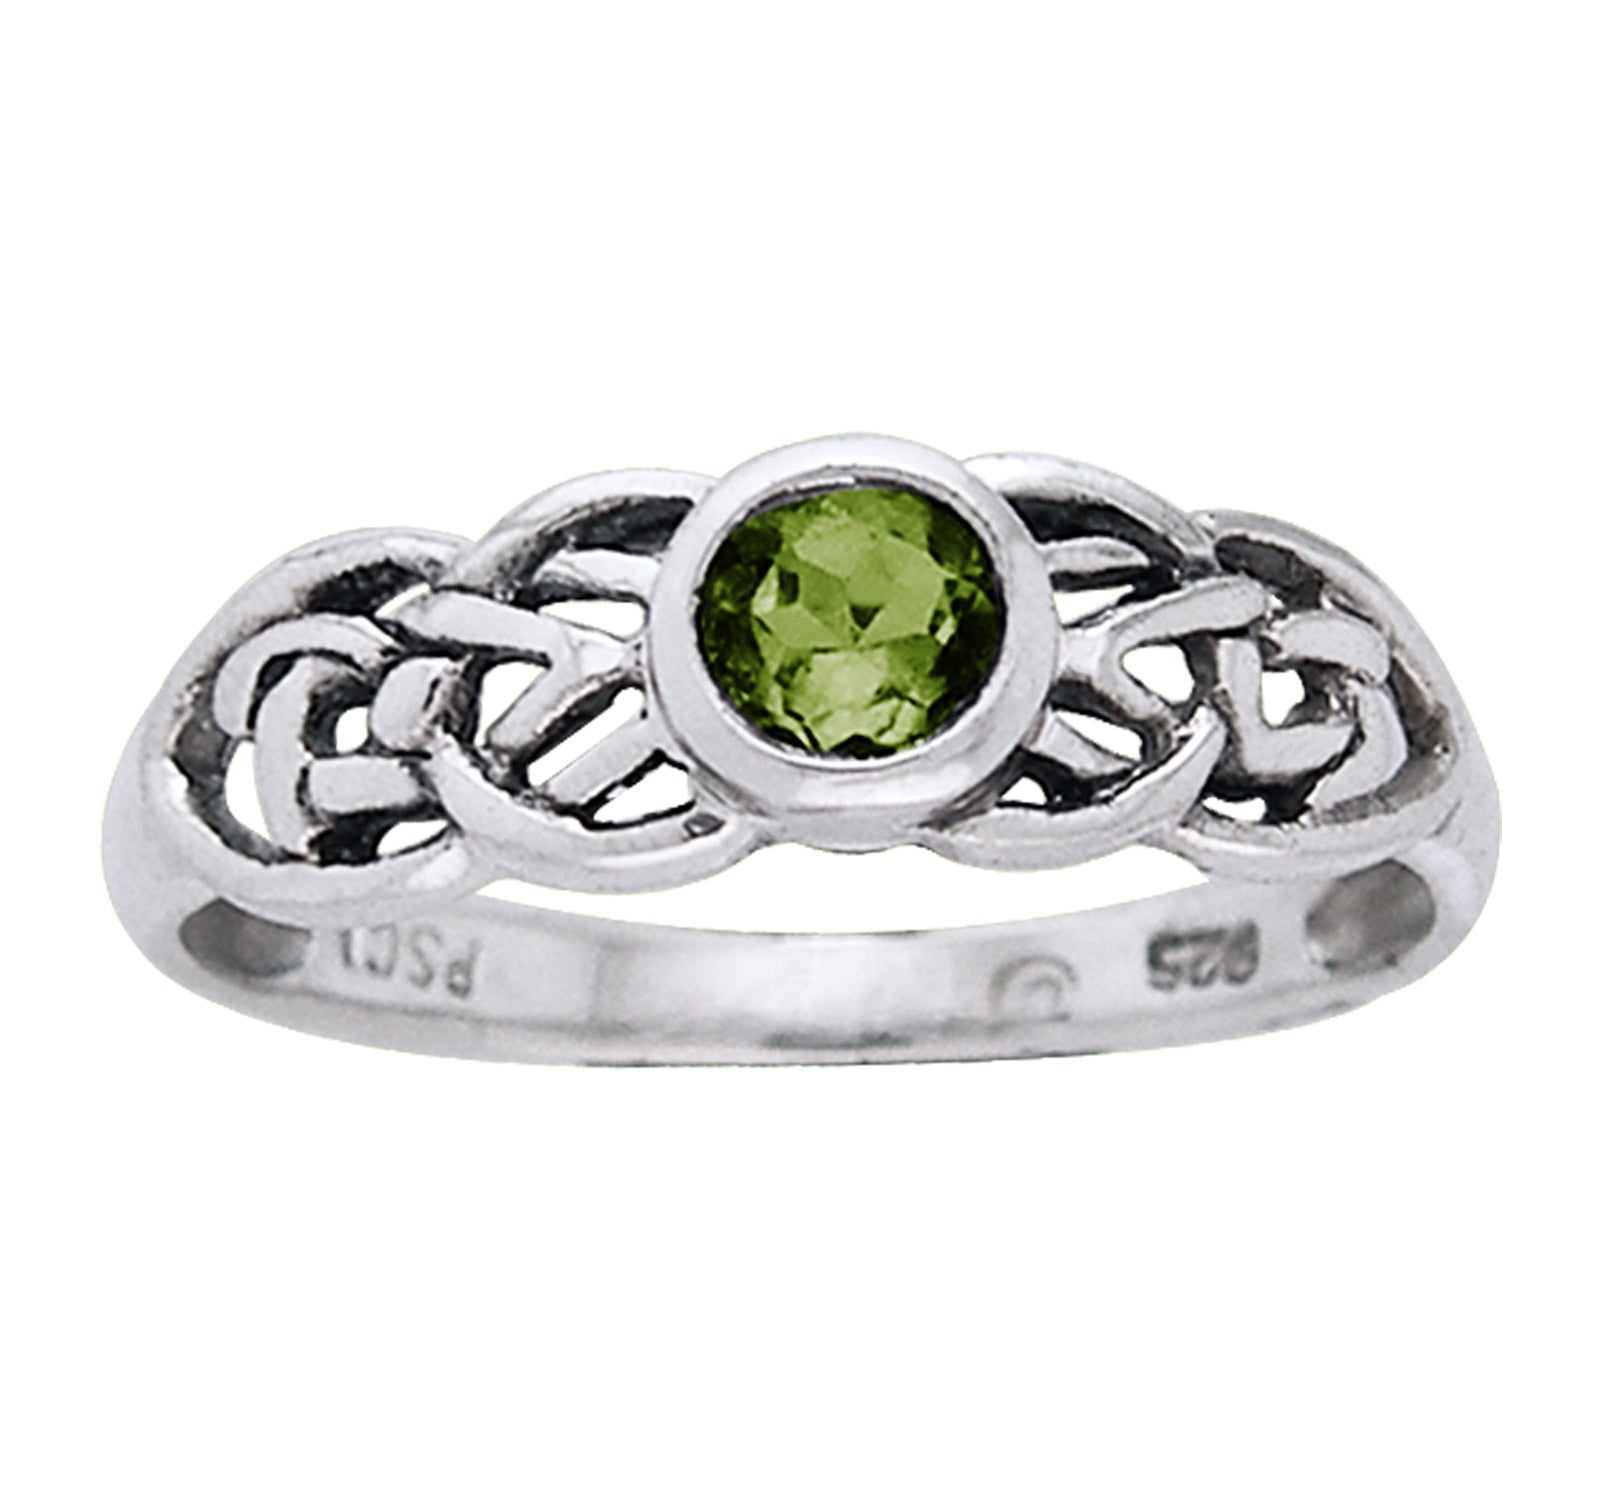 Petite Celtic Knot Birthstone Ring Sterling Silver Genuine Peridot For August - Silver Insanity